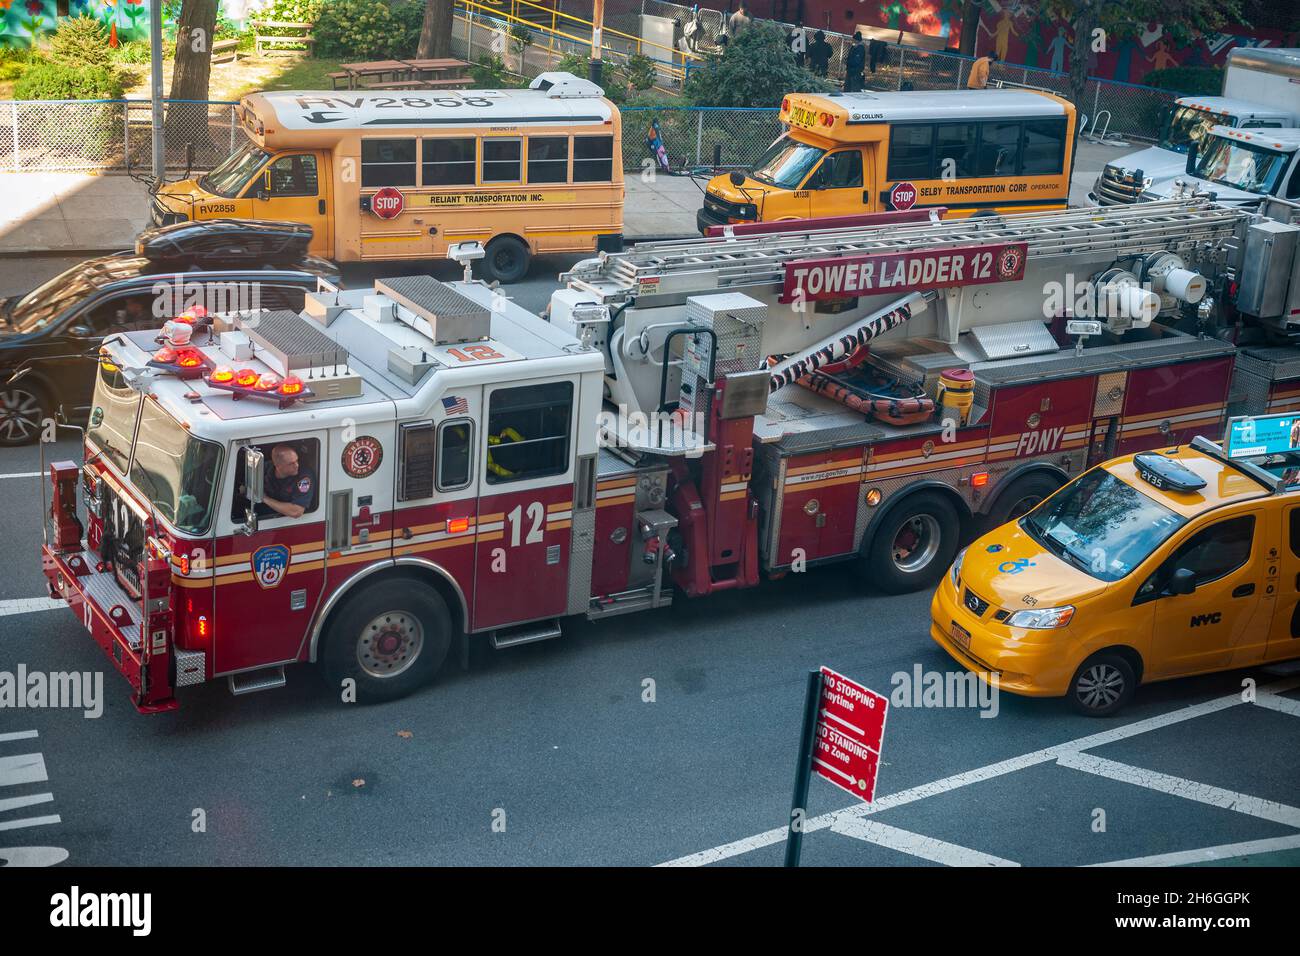 Members of FDNY Ladder 12 and Engine 1 respond to a box in Chelsea in New York on Monday, November 1, 2021. Today is the first day of the city’s vaccine mandate requiring all city workers to be vaccinated or be put on unpaid leave. (© Richard B. Levine) Stock Photo